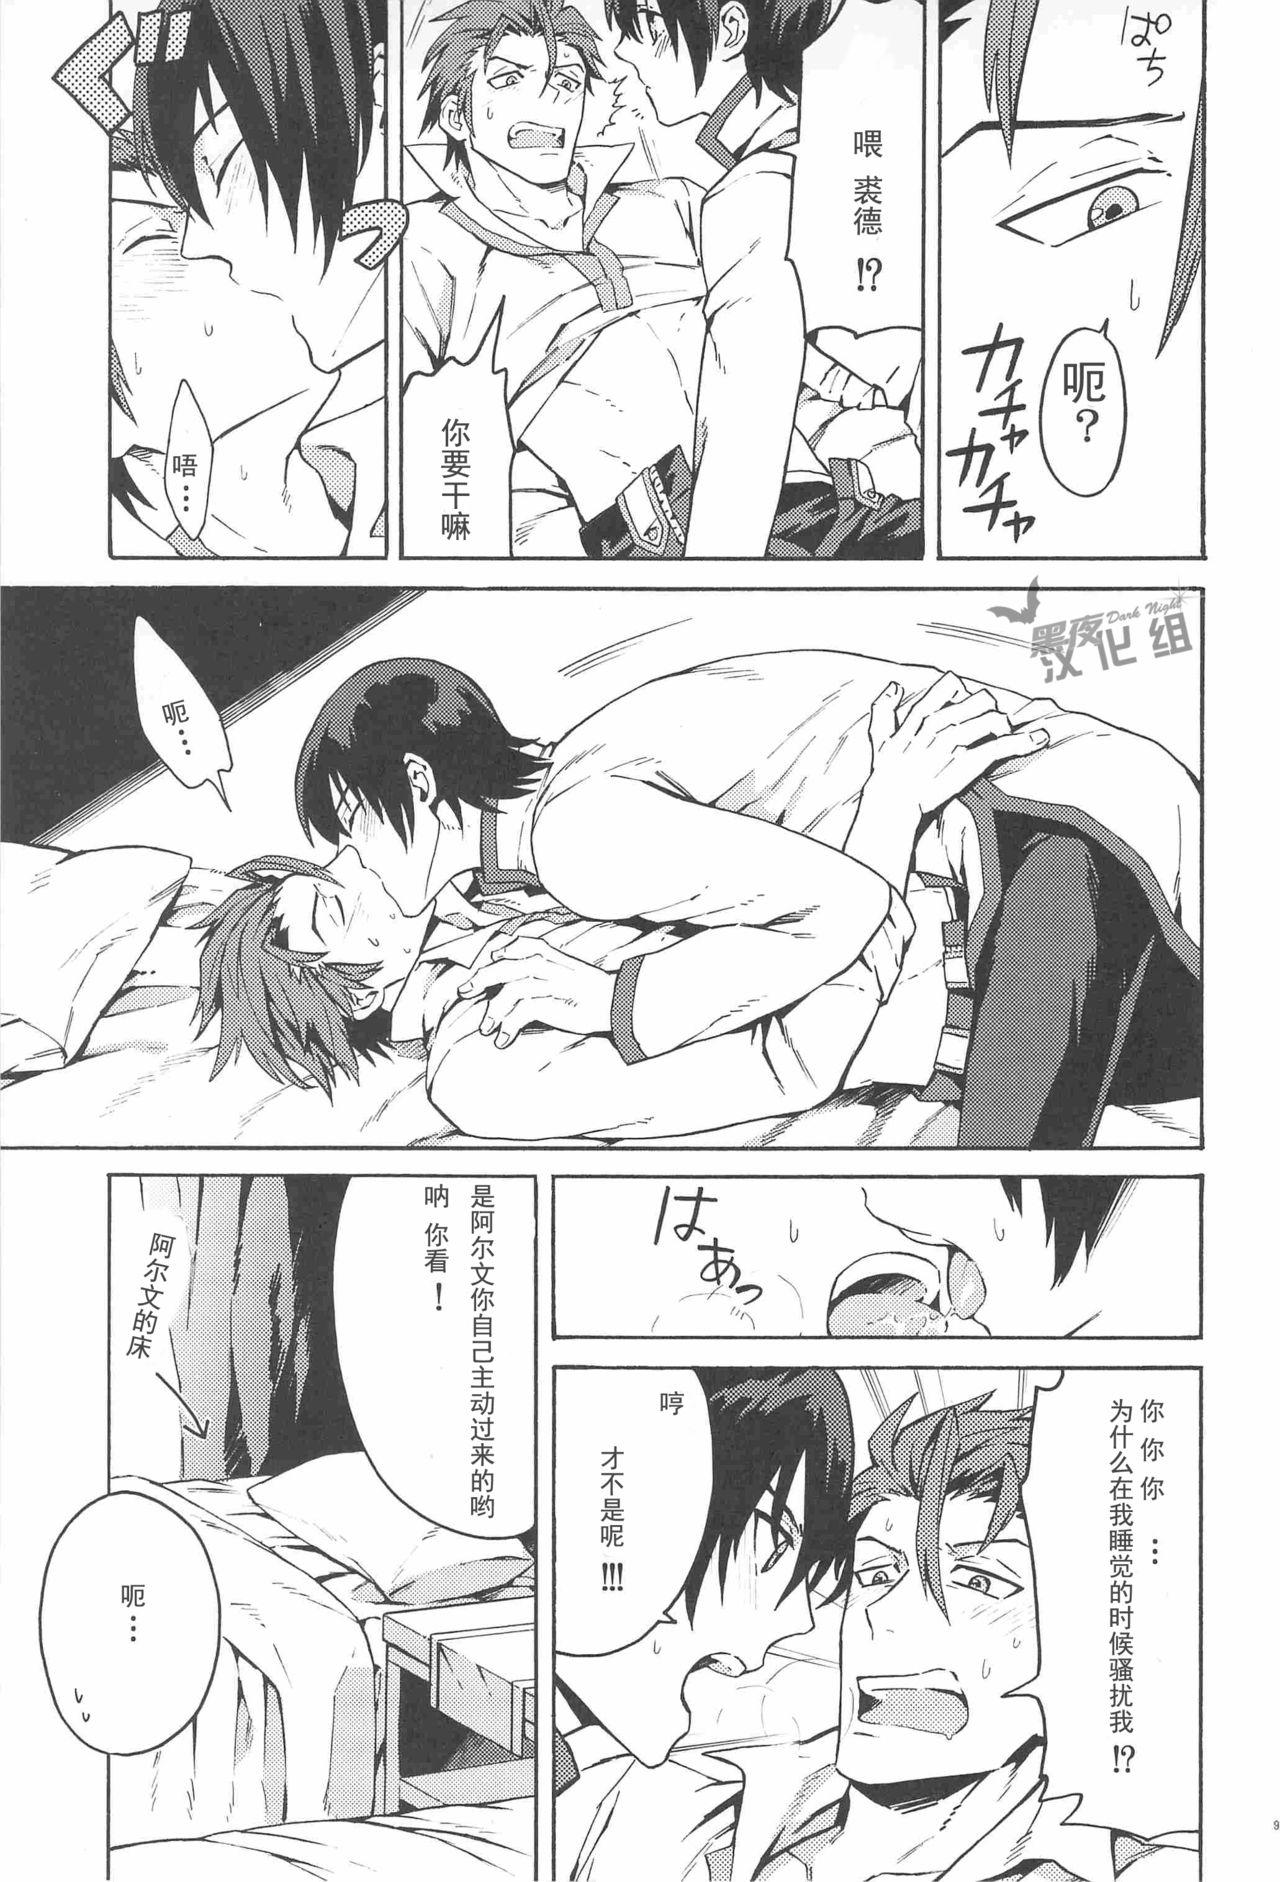 Best Blowjobs Ever Manzoku suru made Tabesasete | 让你吃到饱为止 - Tales of xillia Gay Solo - Page 9